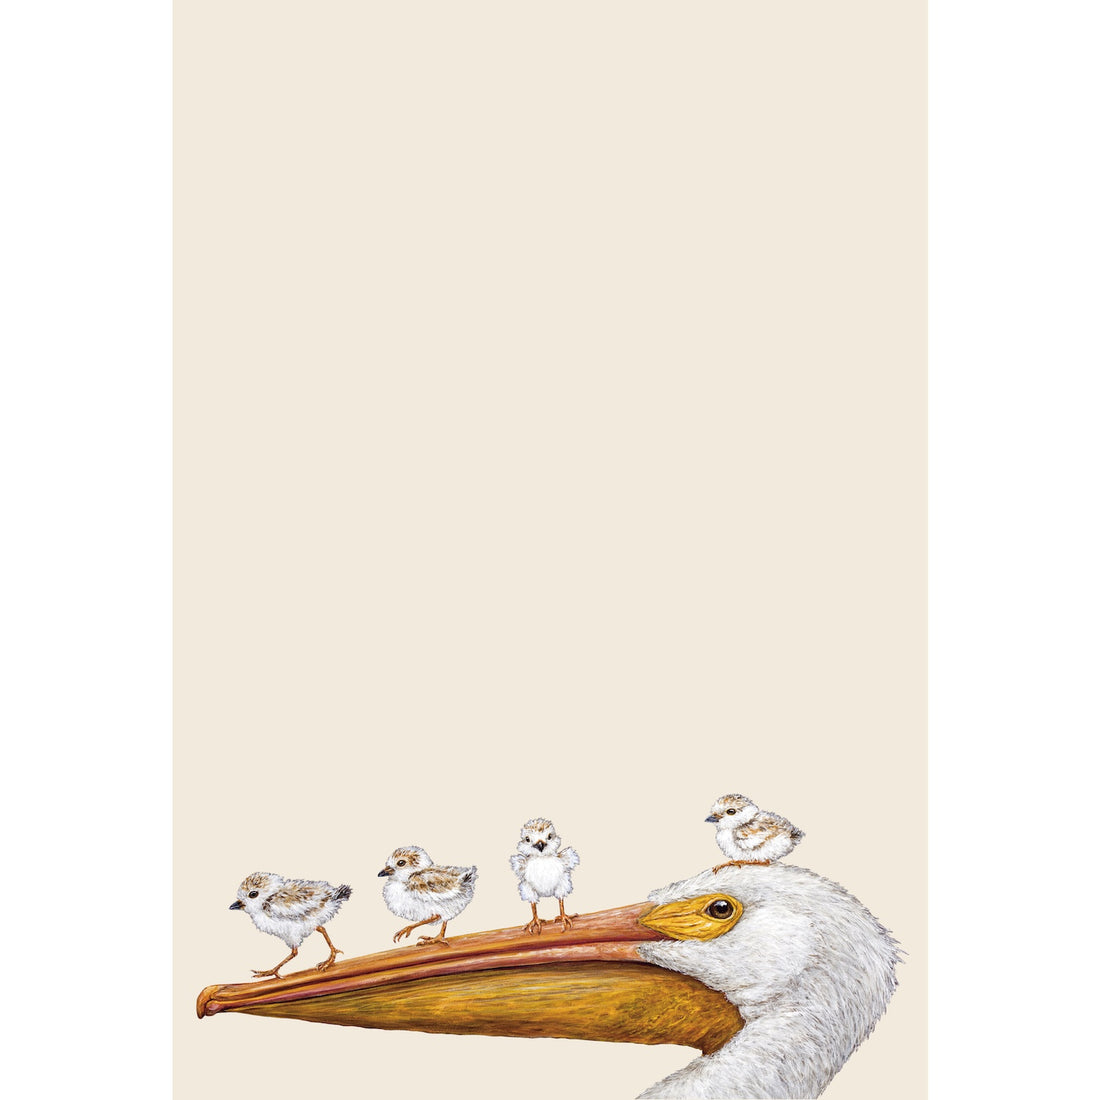 Three small birds perched on the beak of a pelican against a beige background on one of Hester &amp; Cook&